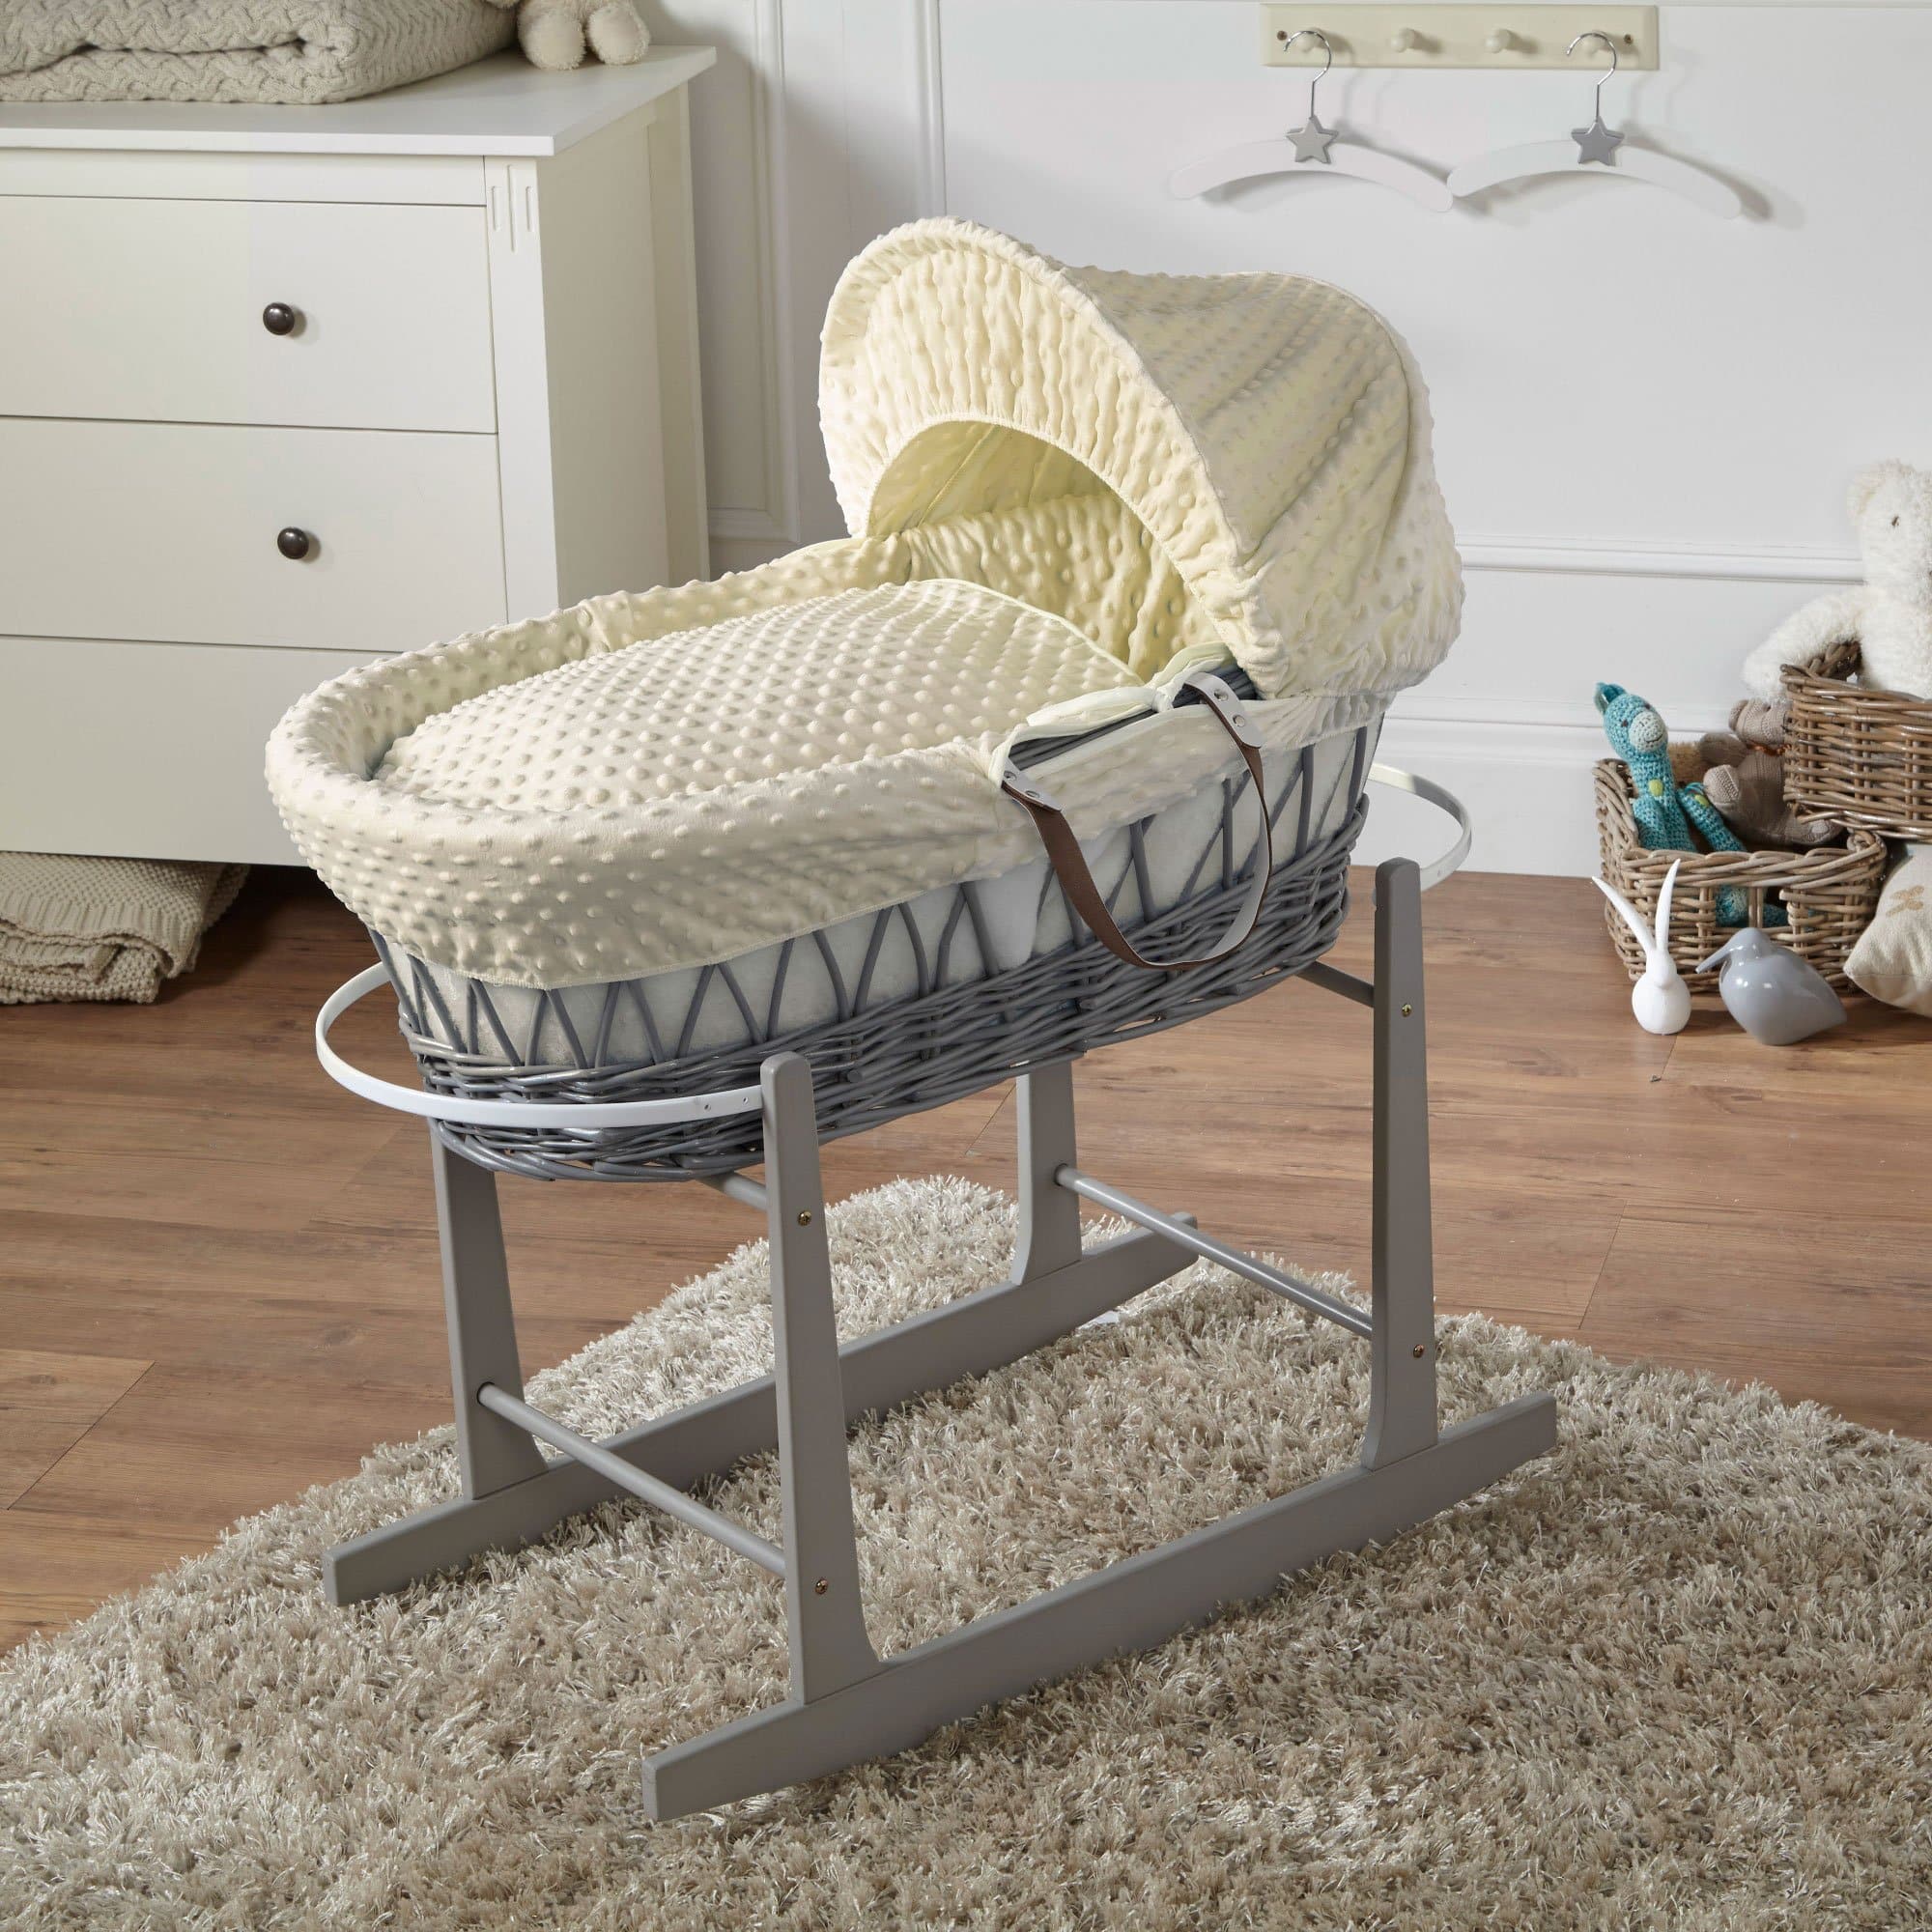 Wicker Baby Moses Basket With Stand - Grey / Dimple / Cream | For Your Little One